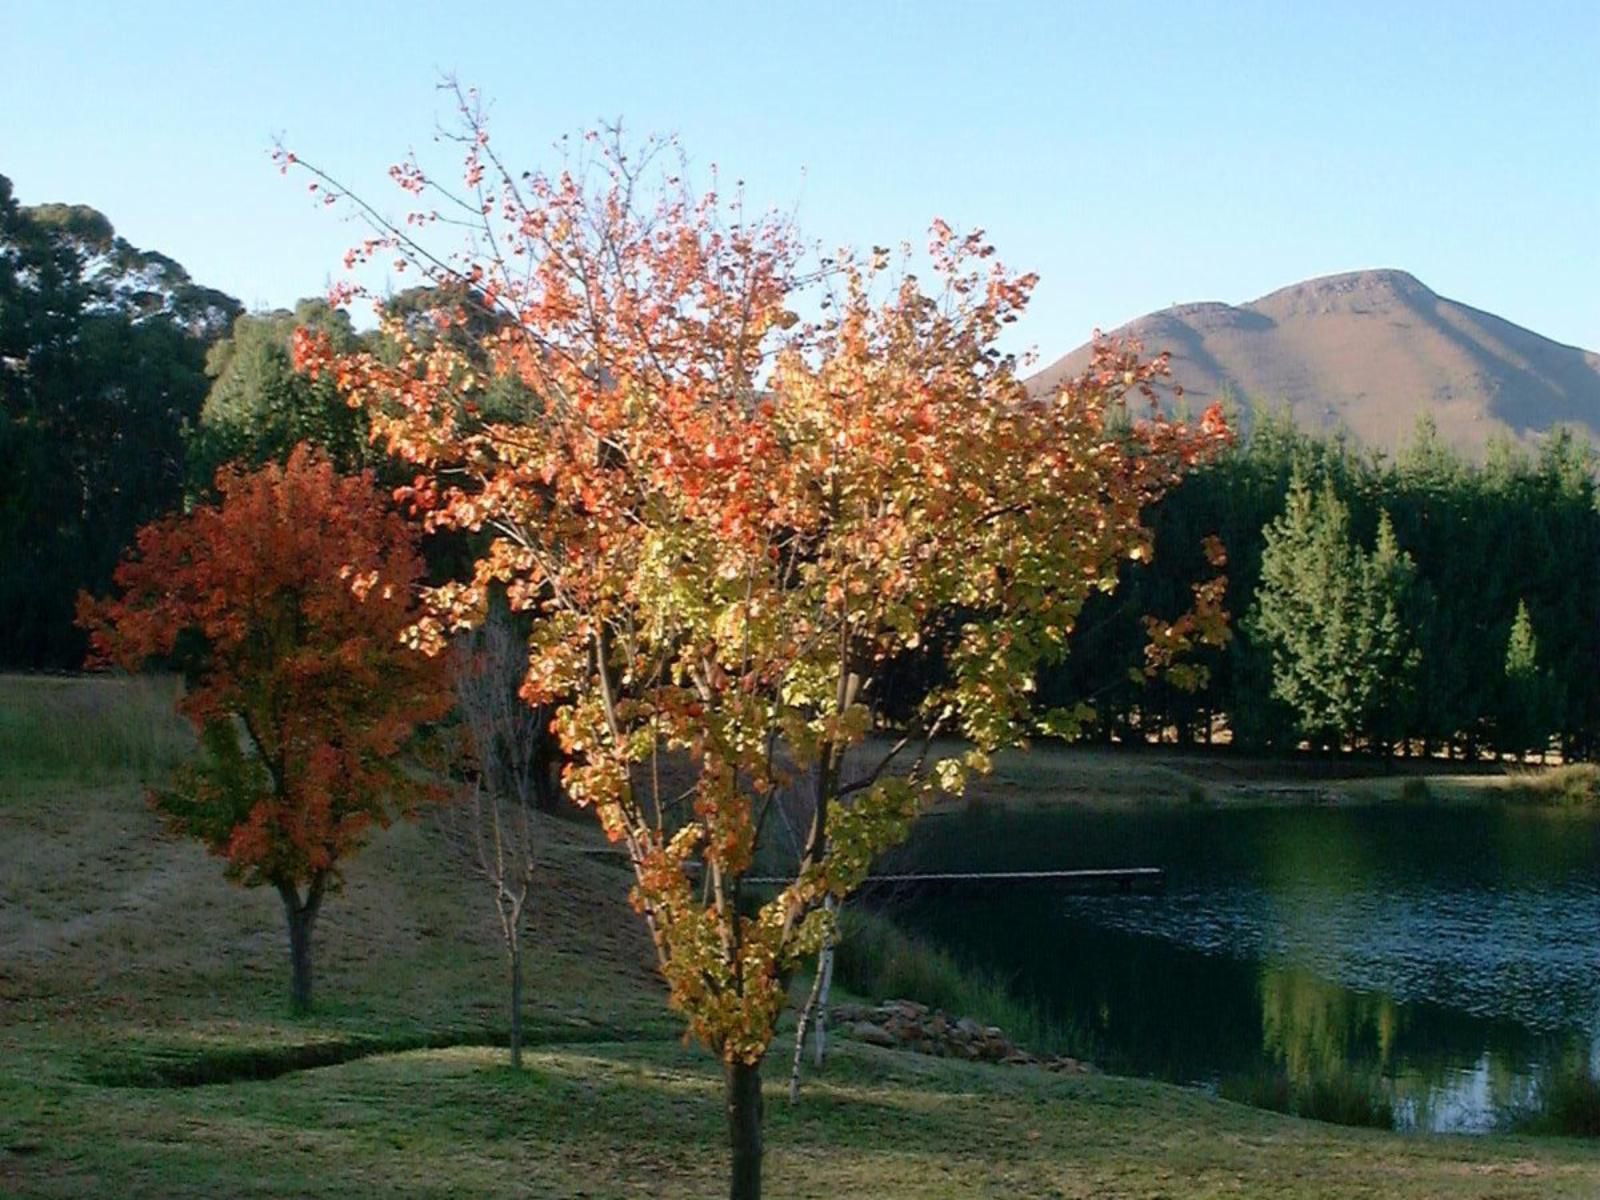 Stonecutters Lodge Dullstroom Mpumalanga South Africa Complementary Colors, Tree, Plant, Nature, Wood, Autumn